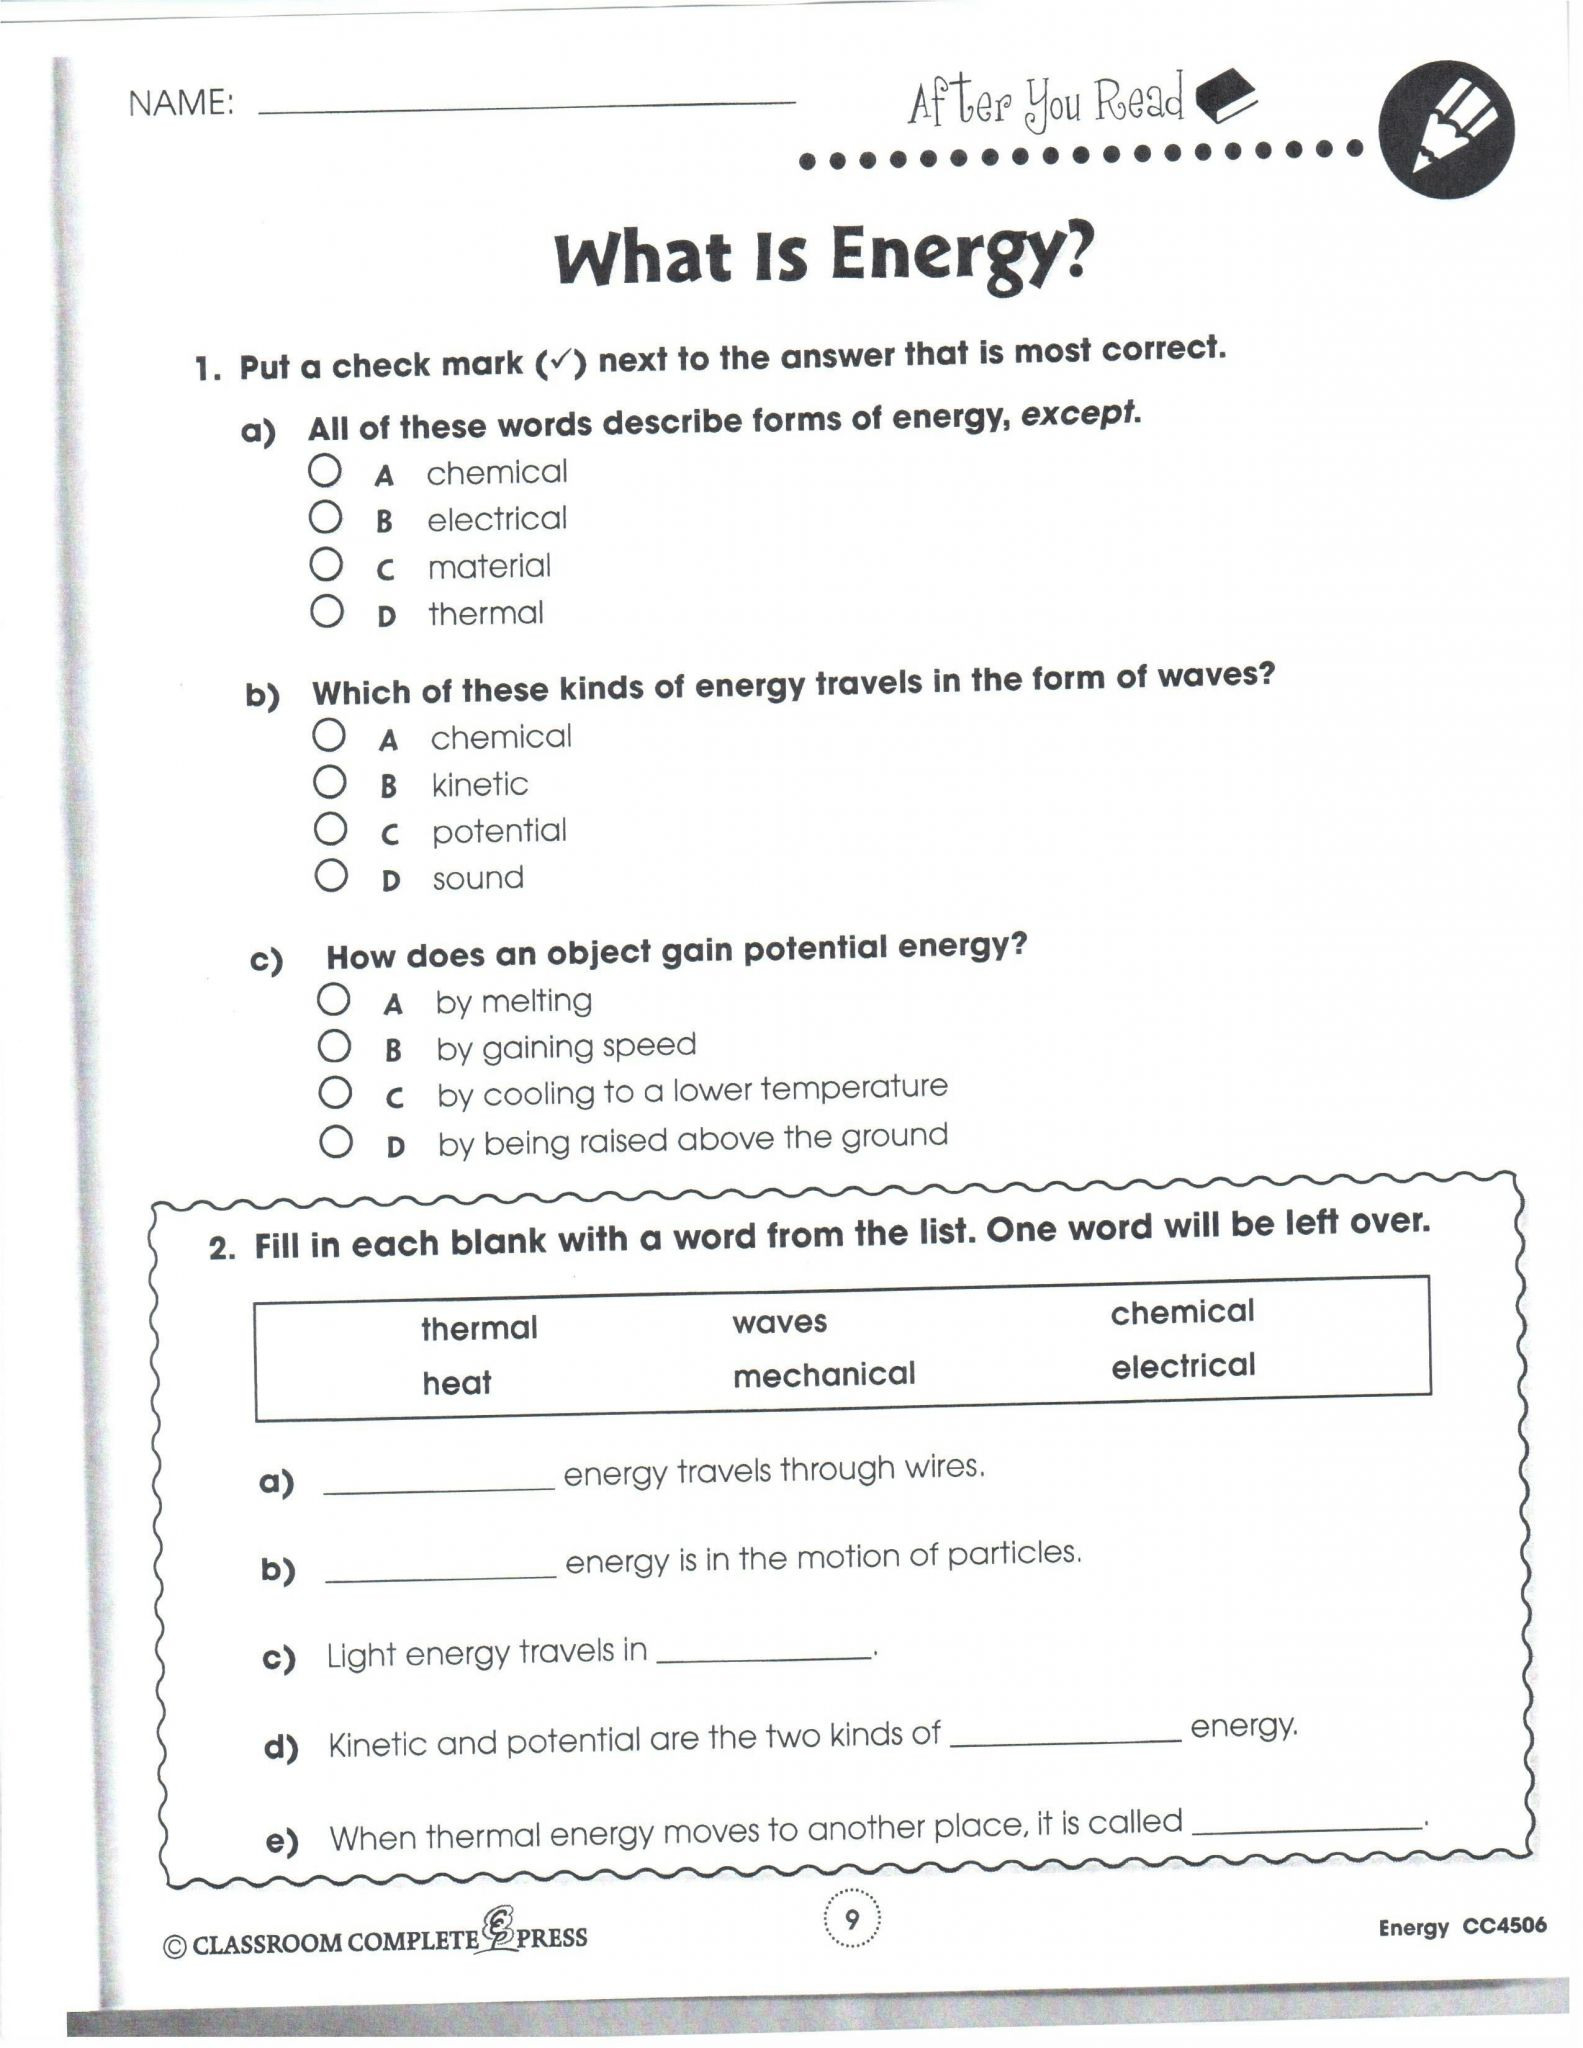 Radioactive Decay Webquest Worksheet Answers